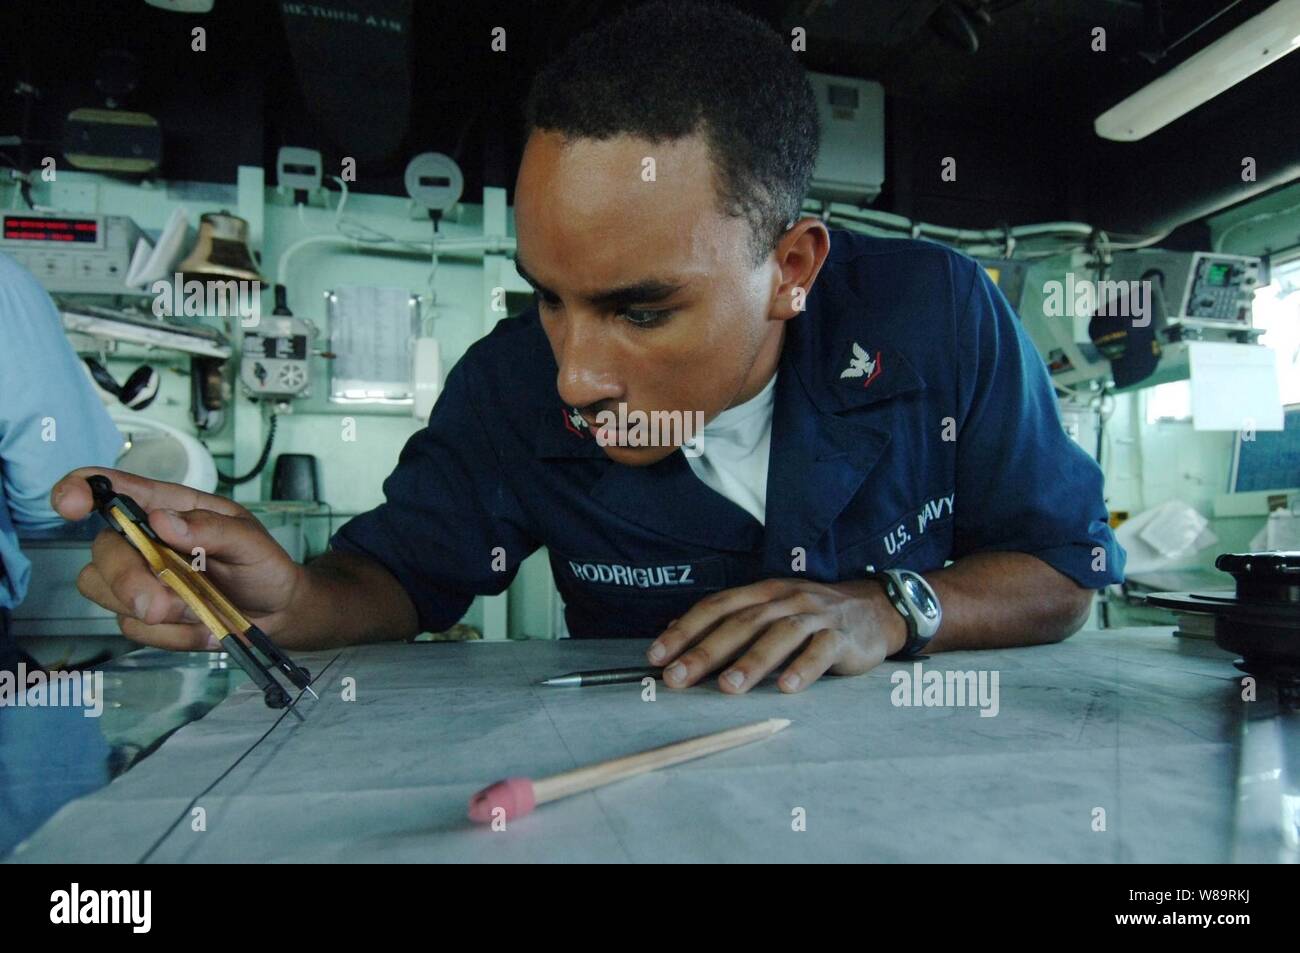 U.S. Navy Petty Officer 3rd Class Carlos Rodriguez plots his shipís position on a navigation chart on the bridge of the USS Carter Hall (LSD 50) during a underway replenishment with the Military Sealift Command oiler USNS Rappahannock (T-AO 204) in the Persian Gulf on Feb. 16, 2006.  Carter Hall is conducting maritime security operations in the Gulf region as part of the USS Nassau (LHA 4) Expeditionary Strike Group.  Rodriguez is a Navy quartermaster on board the Carter Hall. Stock Photo